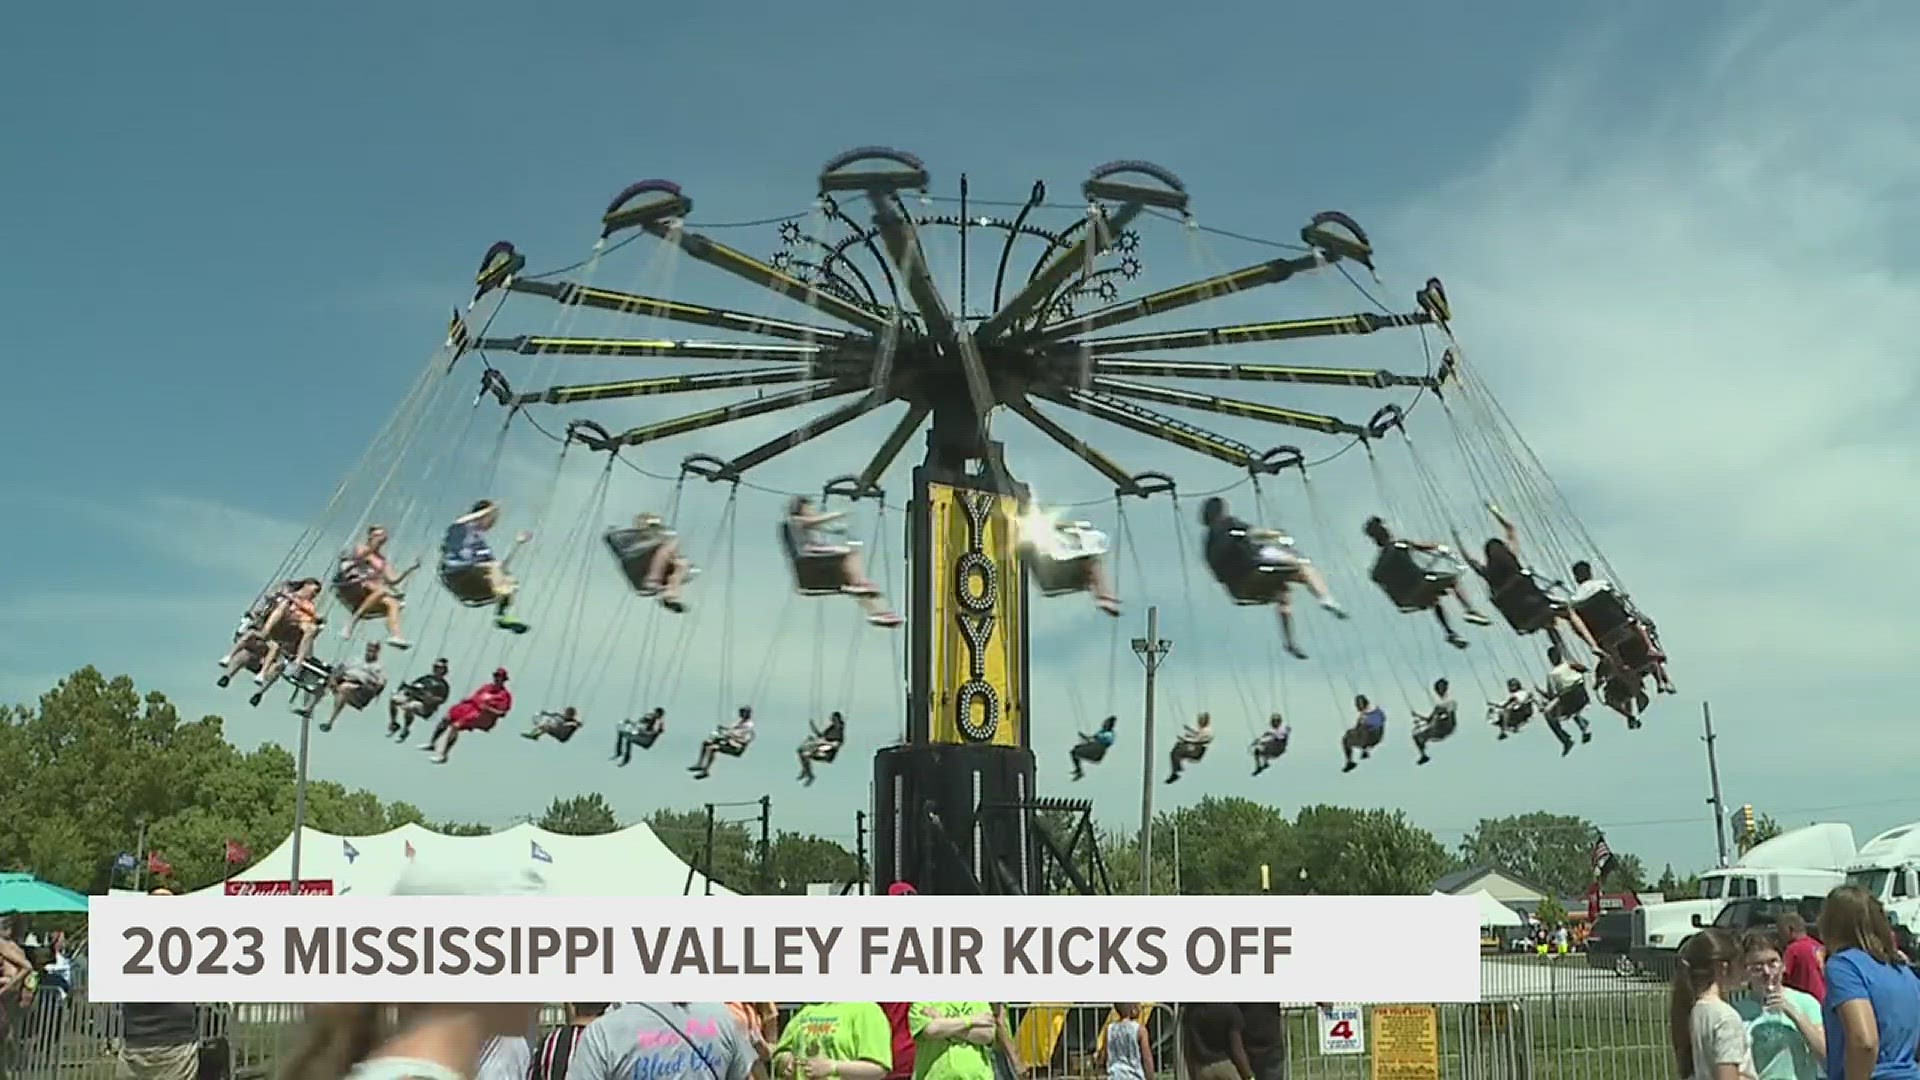 2023 Mississippi Valley Fair kicks off with Special Needs Day